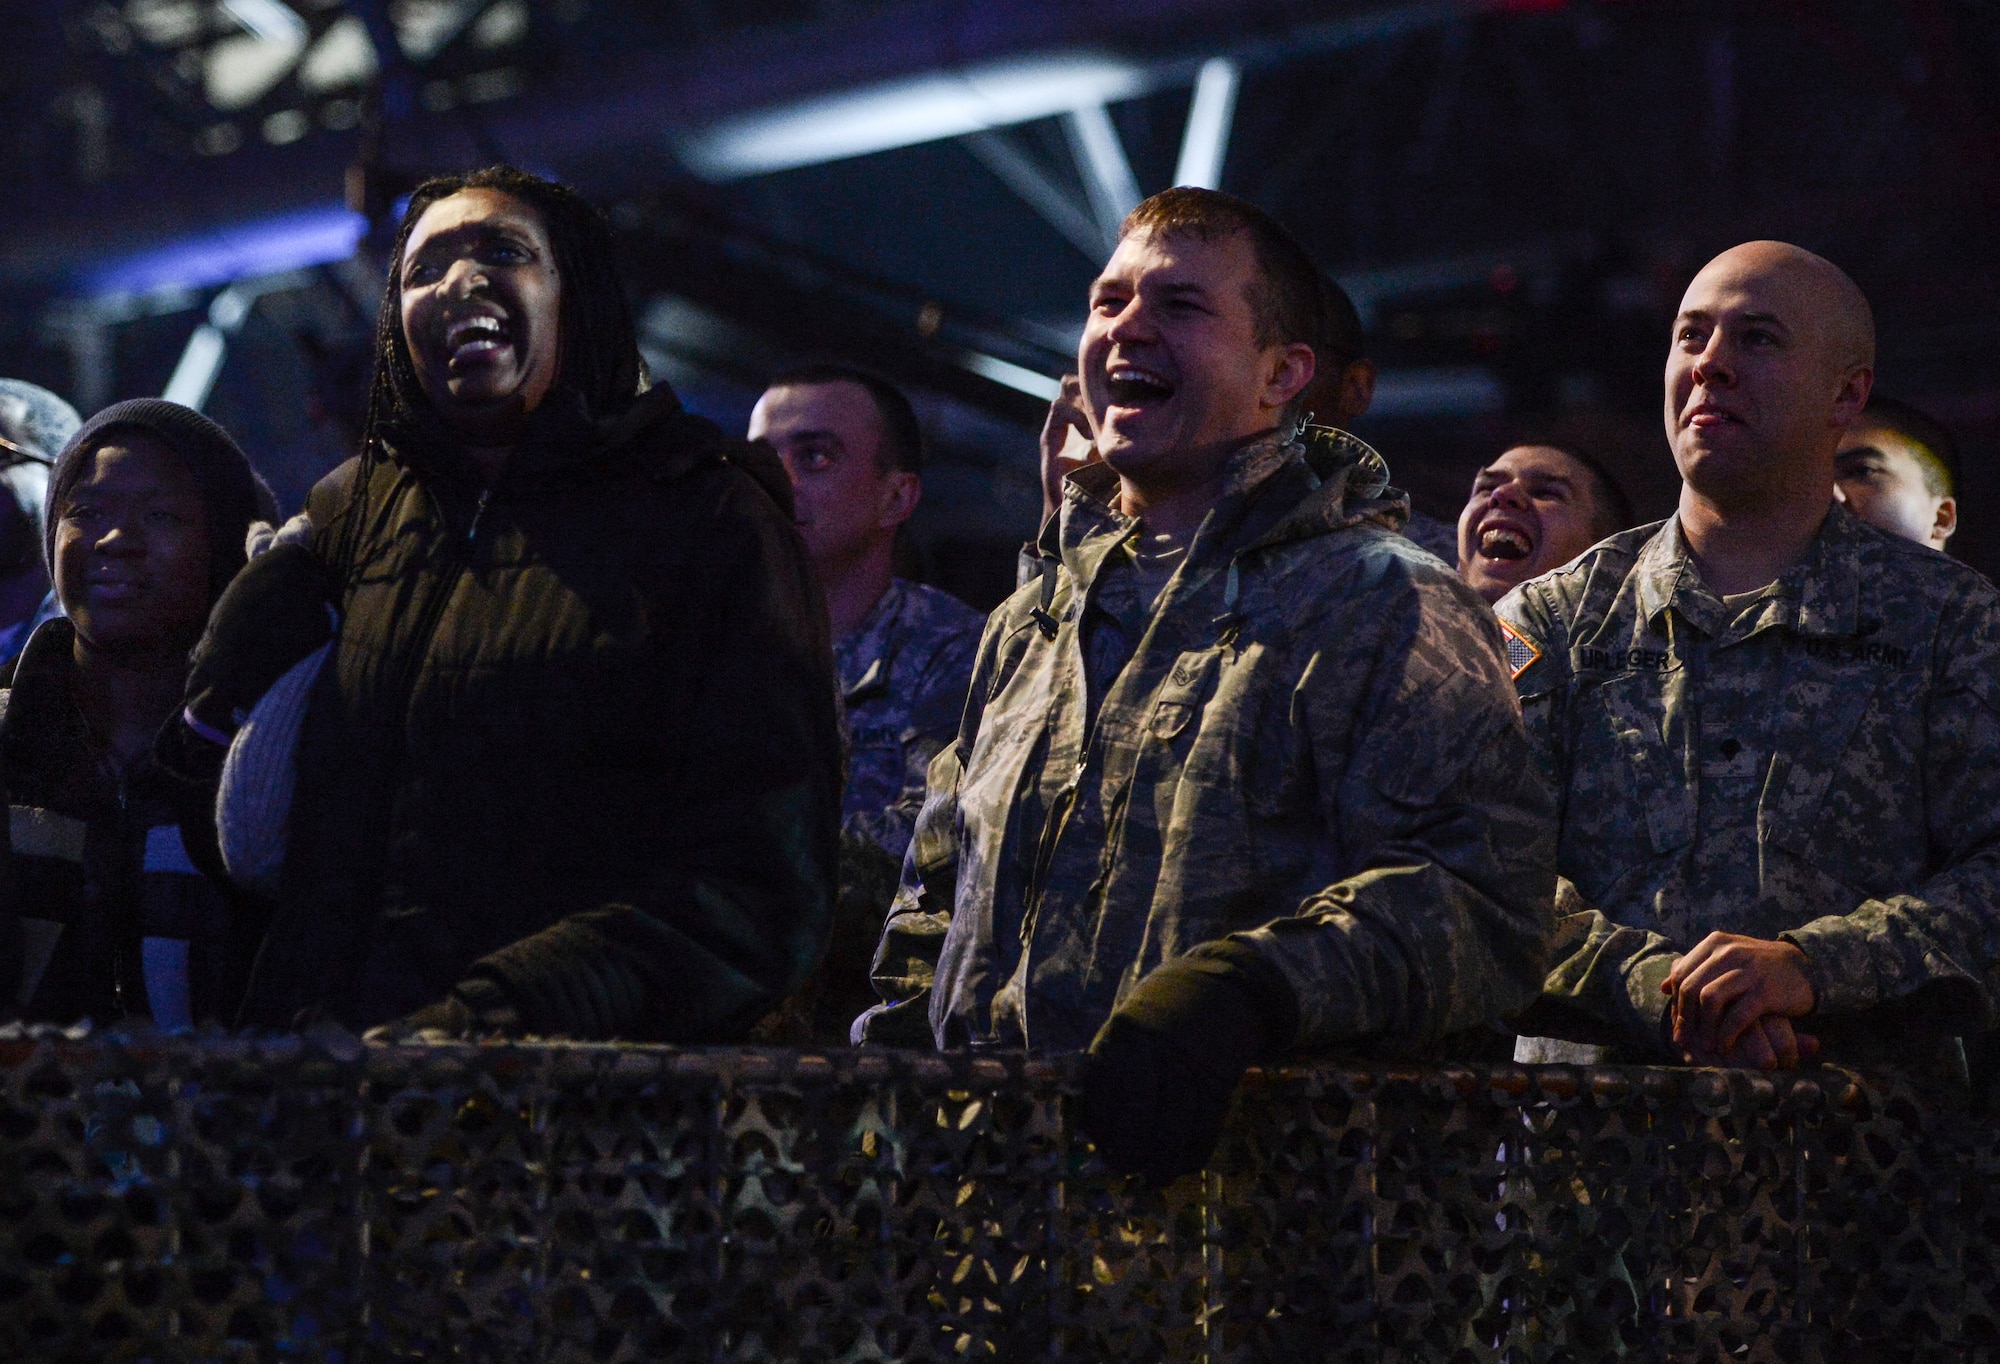 Audience members laugh during a performance by comedian Jeff Dunham, Dec. 11, 2013, at the WWE Tribute to the Troops event at Joint Base Lewis-McChord, Wash. The event took place at a hangar at McChord Field and provided entertainment for 4,000 service members and family members. (U.S. Air Force photo/Tech. Sgt. Sean Tobin)